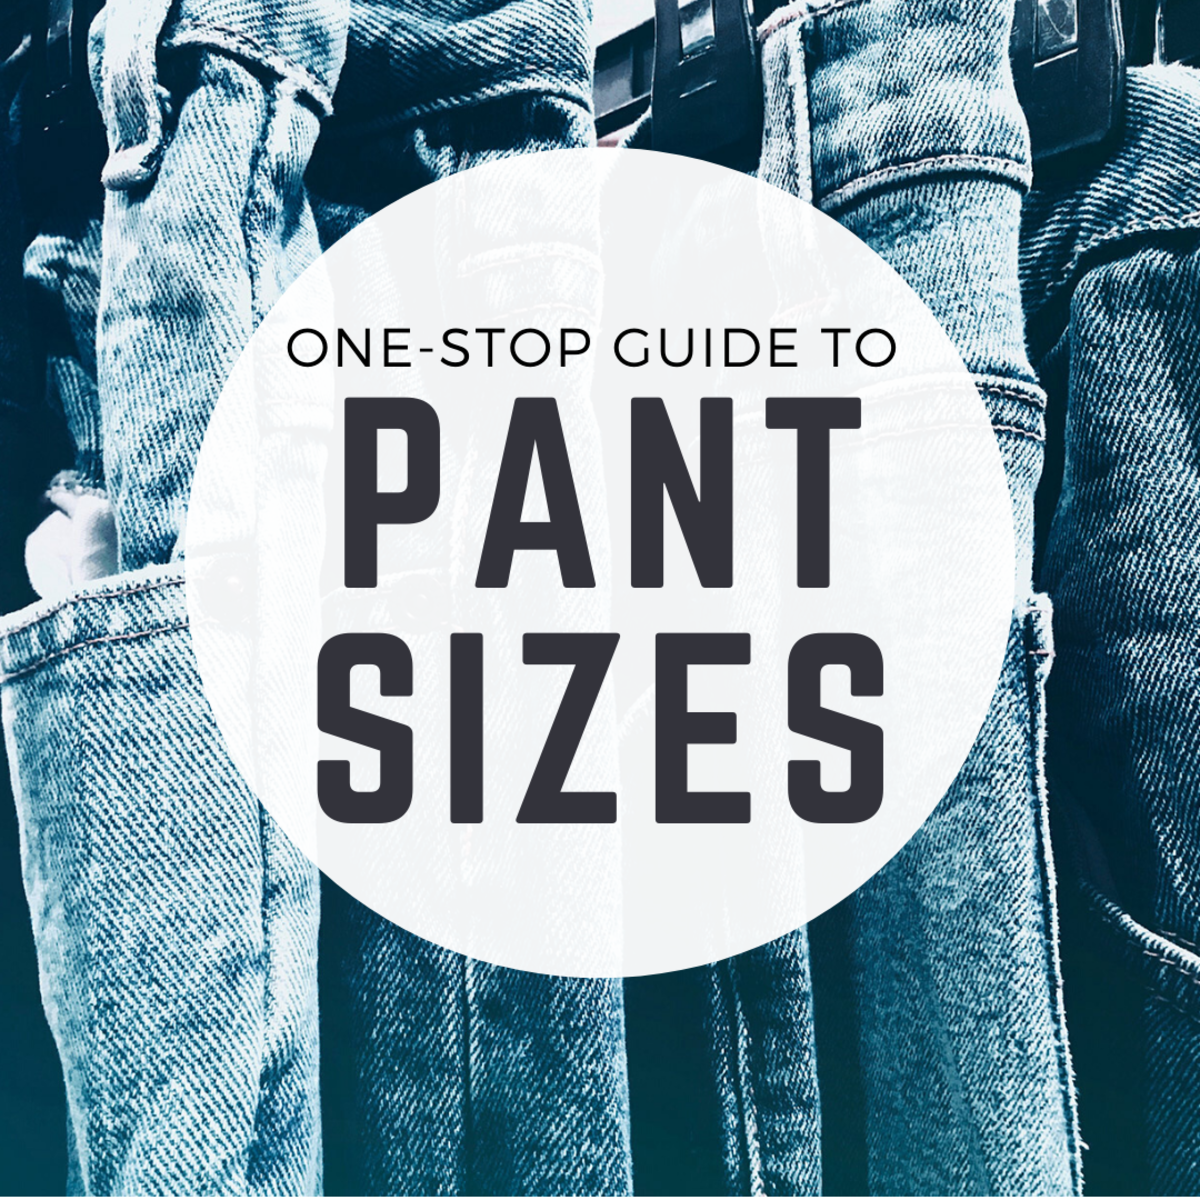 How Long Should Your (suit) Trousers Really Be? - Patrick And Co.